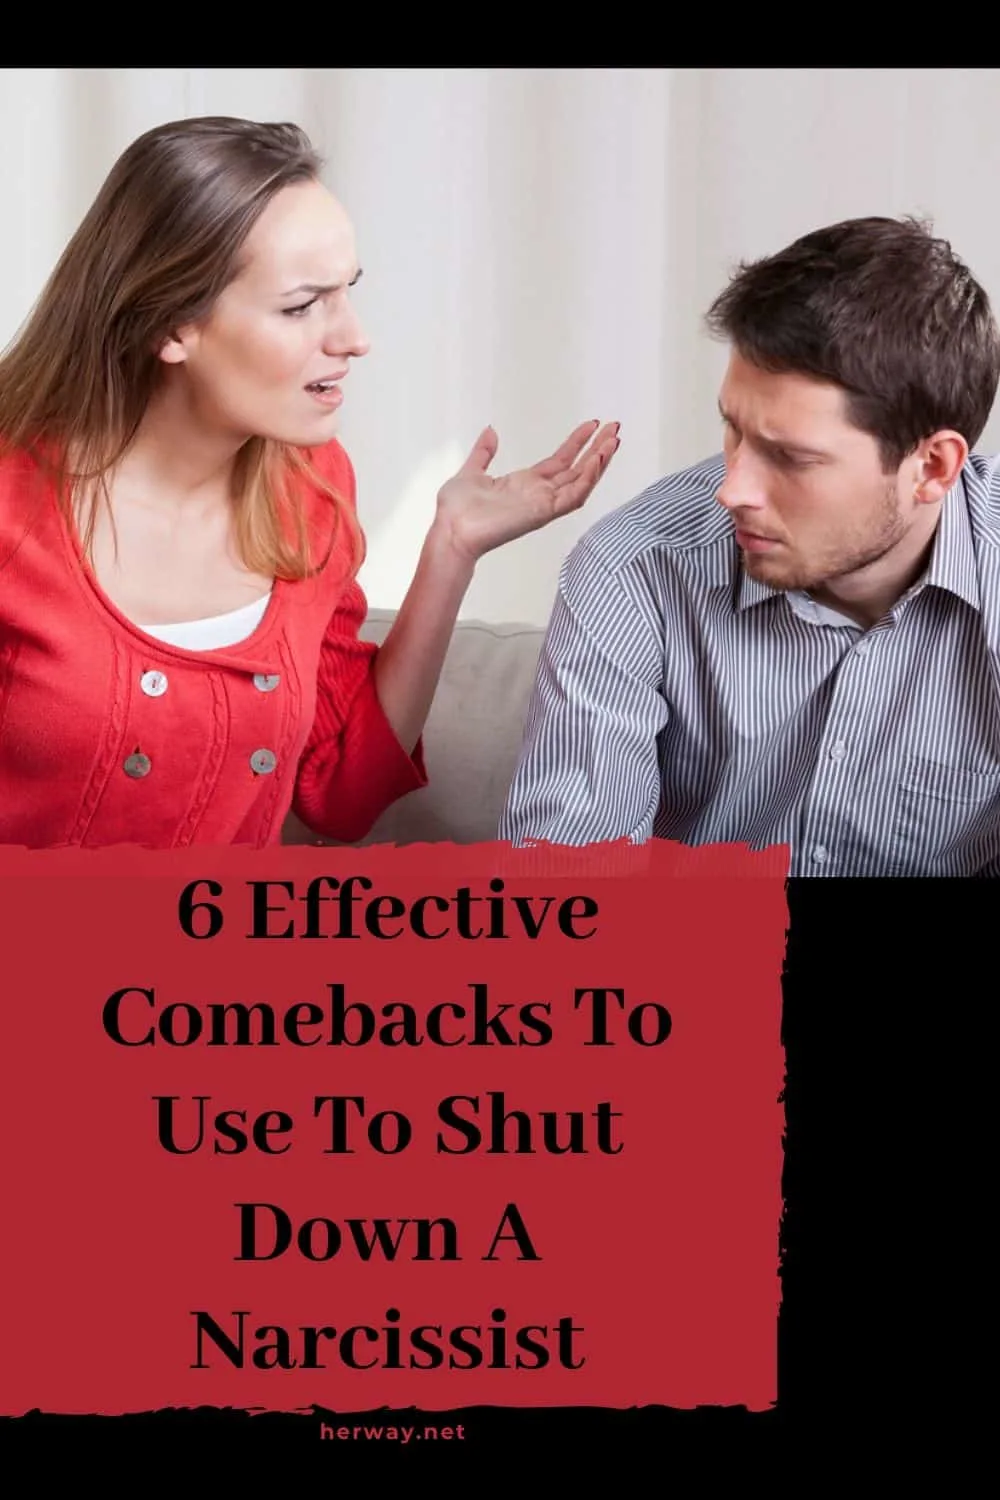 6 Effective Comebacks To Use To Shut Down A Narcissist